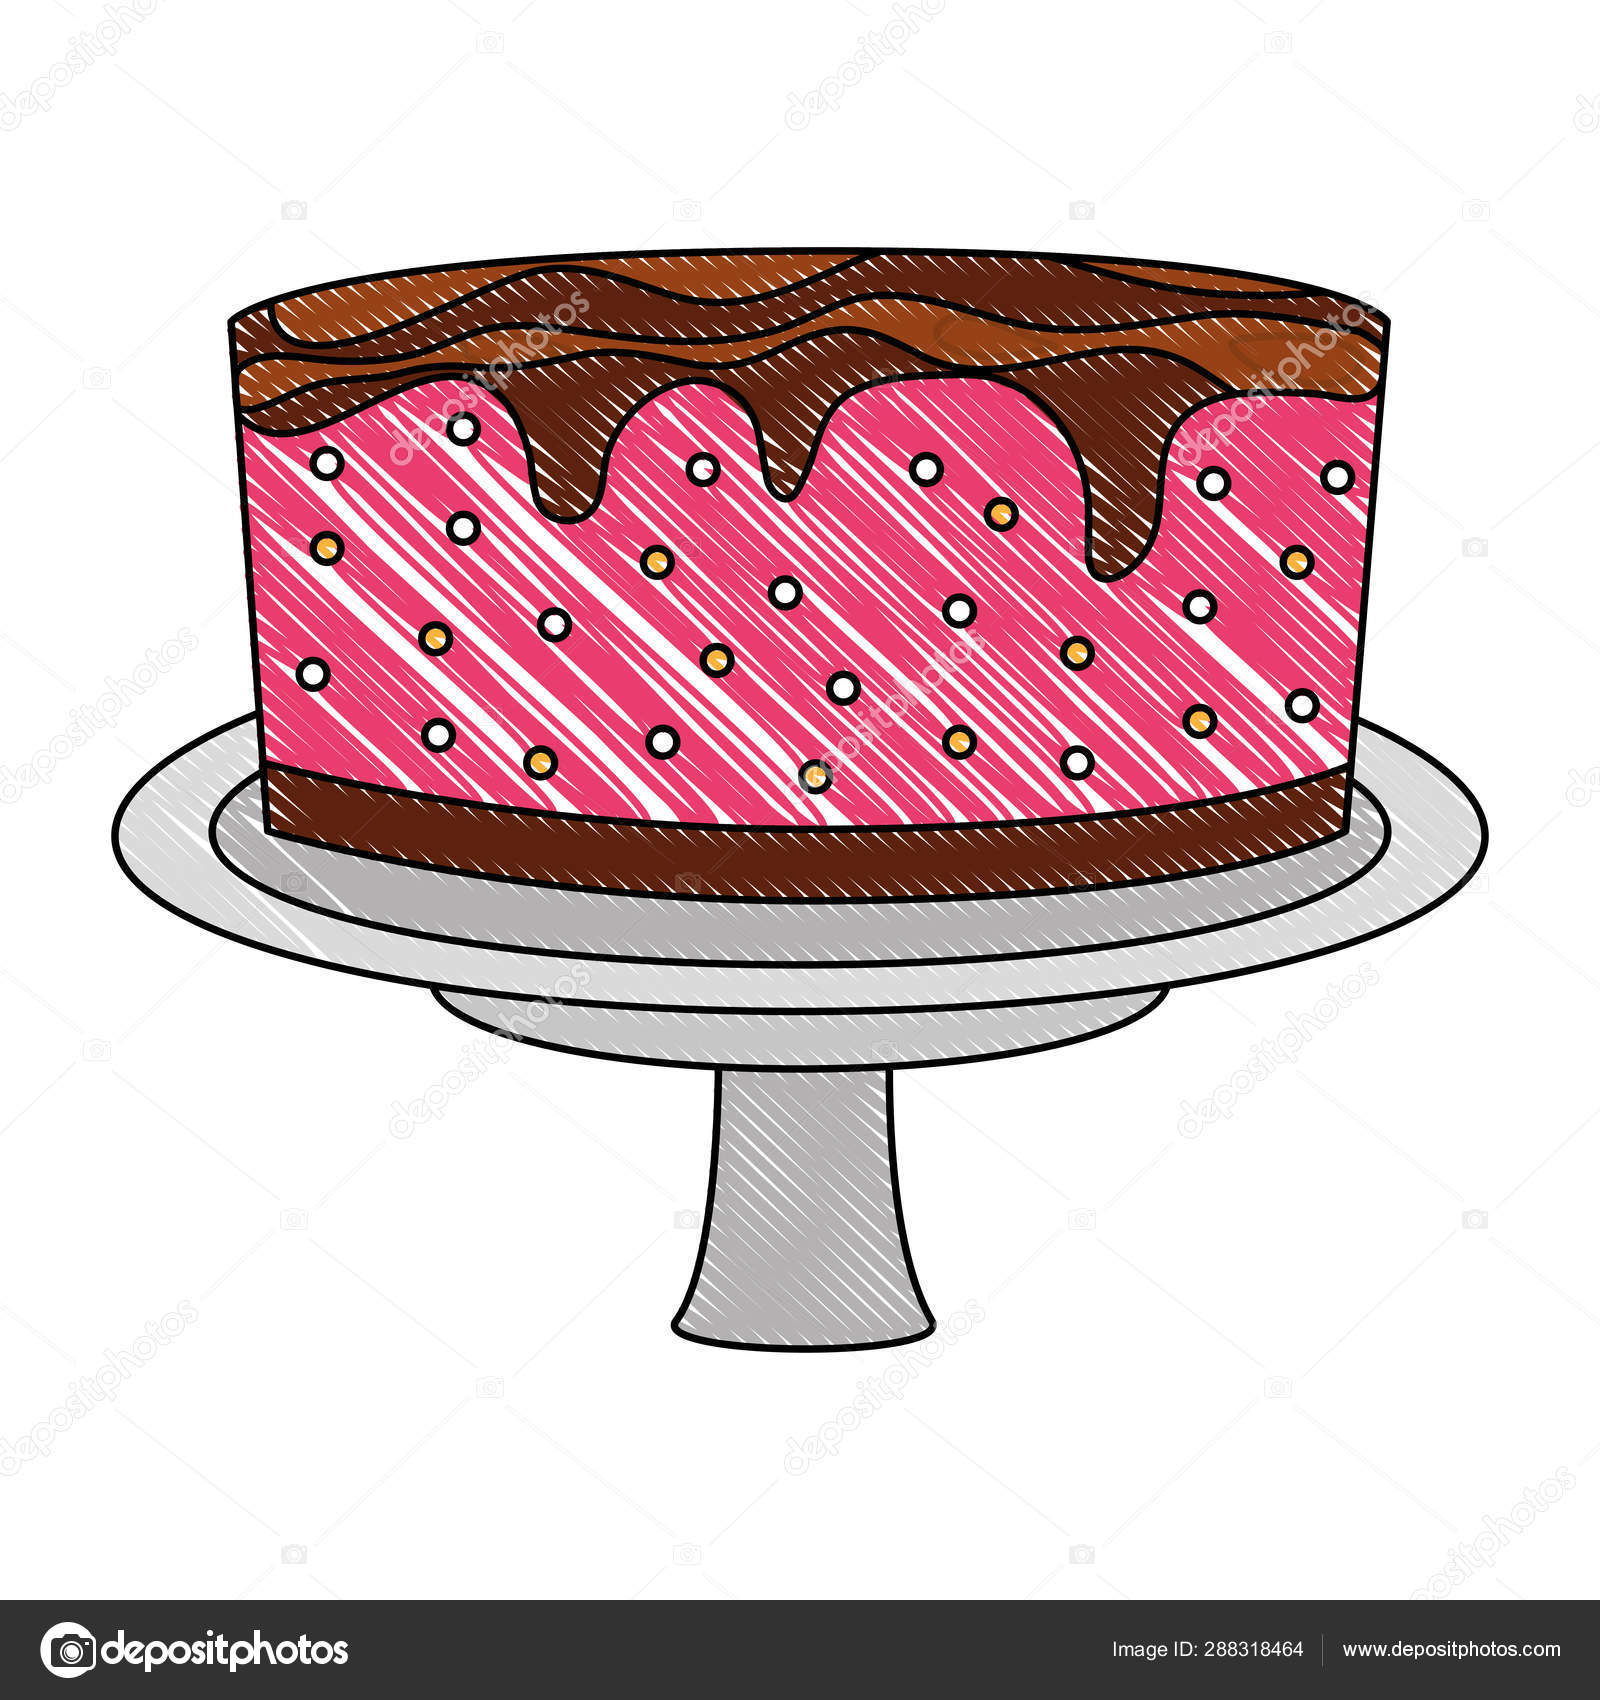 Birthday Sweet Cake In Stand Party Decoration Drawing Color Vector Image By C Yupiramos Vector Stock 288318464